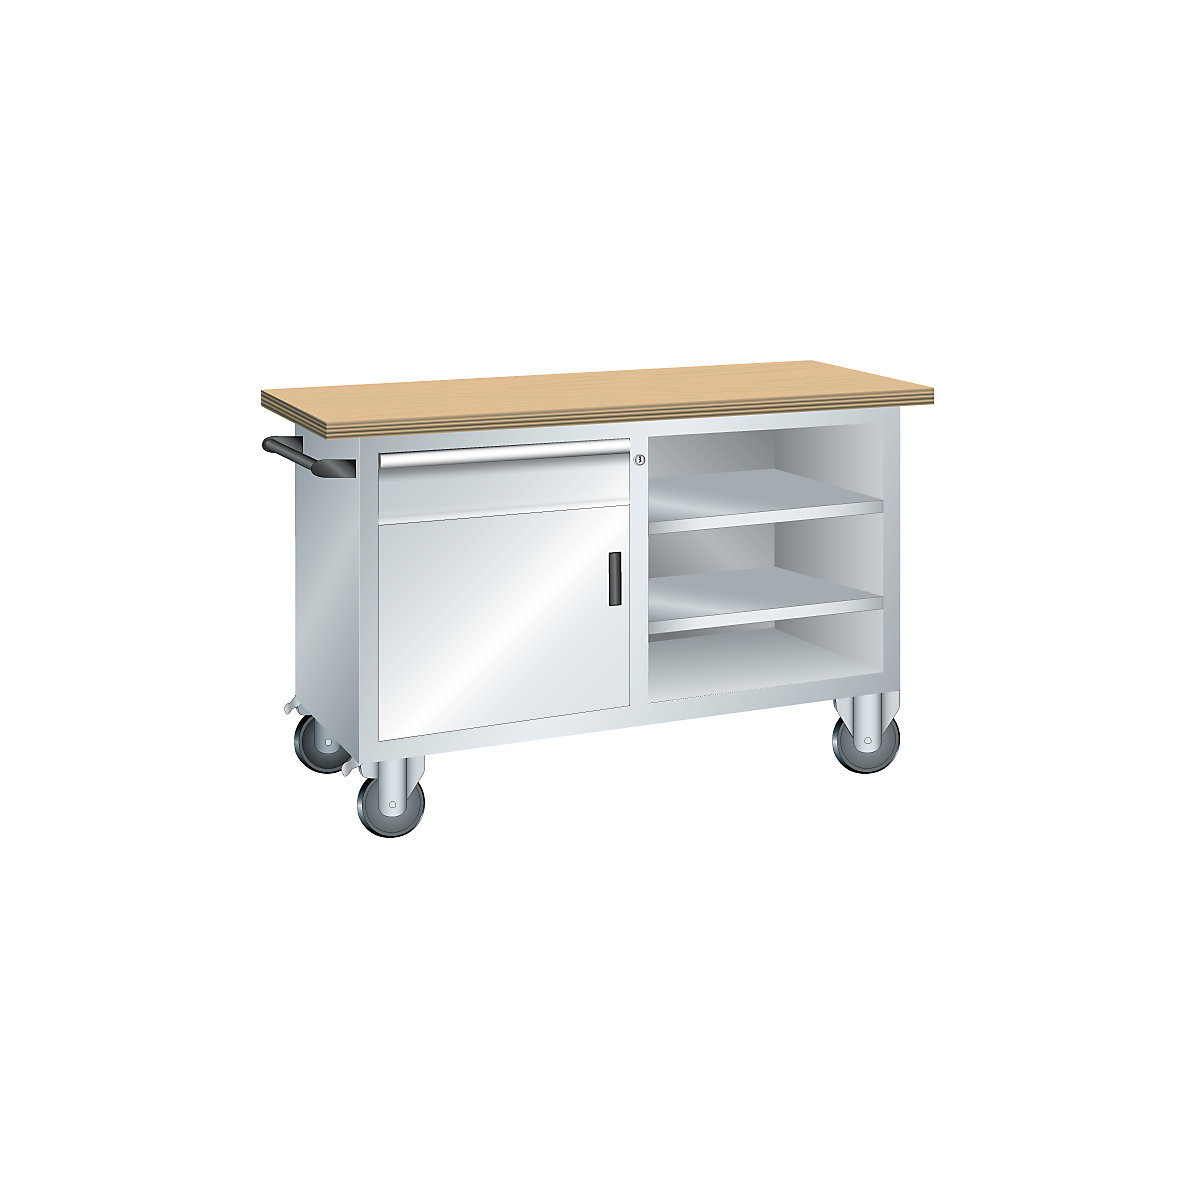 Compact workbench, mobile – LISTA